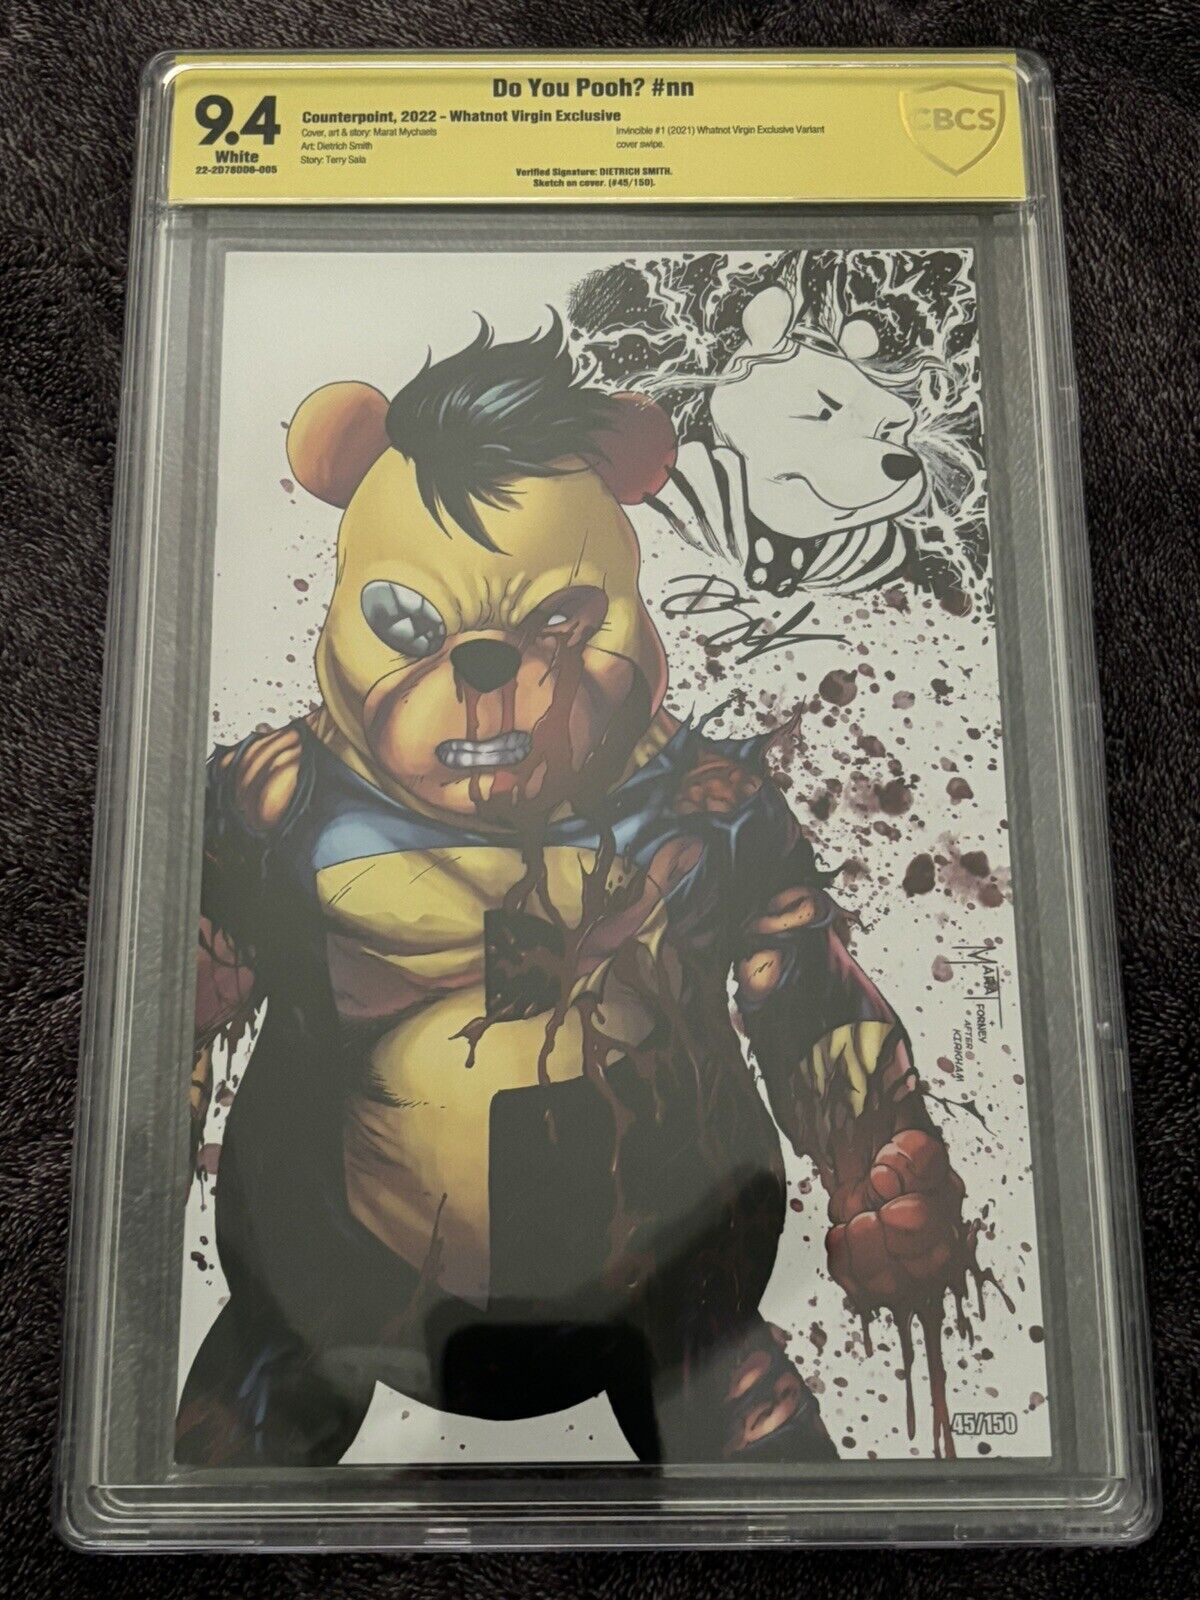 Do You Pooh Invincipooh Virgin Cbcs 9.4 Signed And Remarked By Dietrich Smith